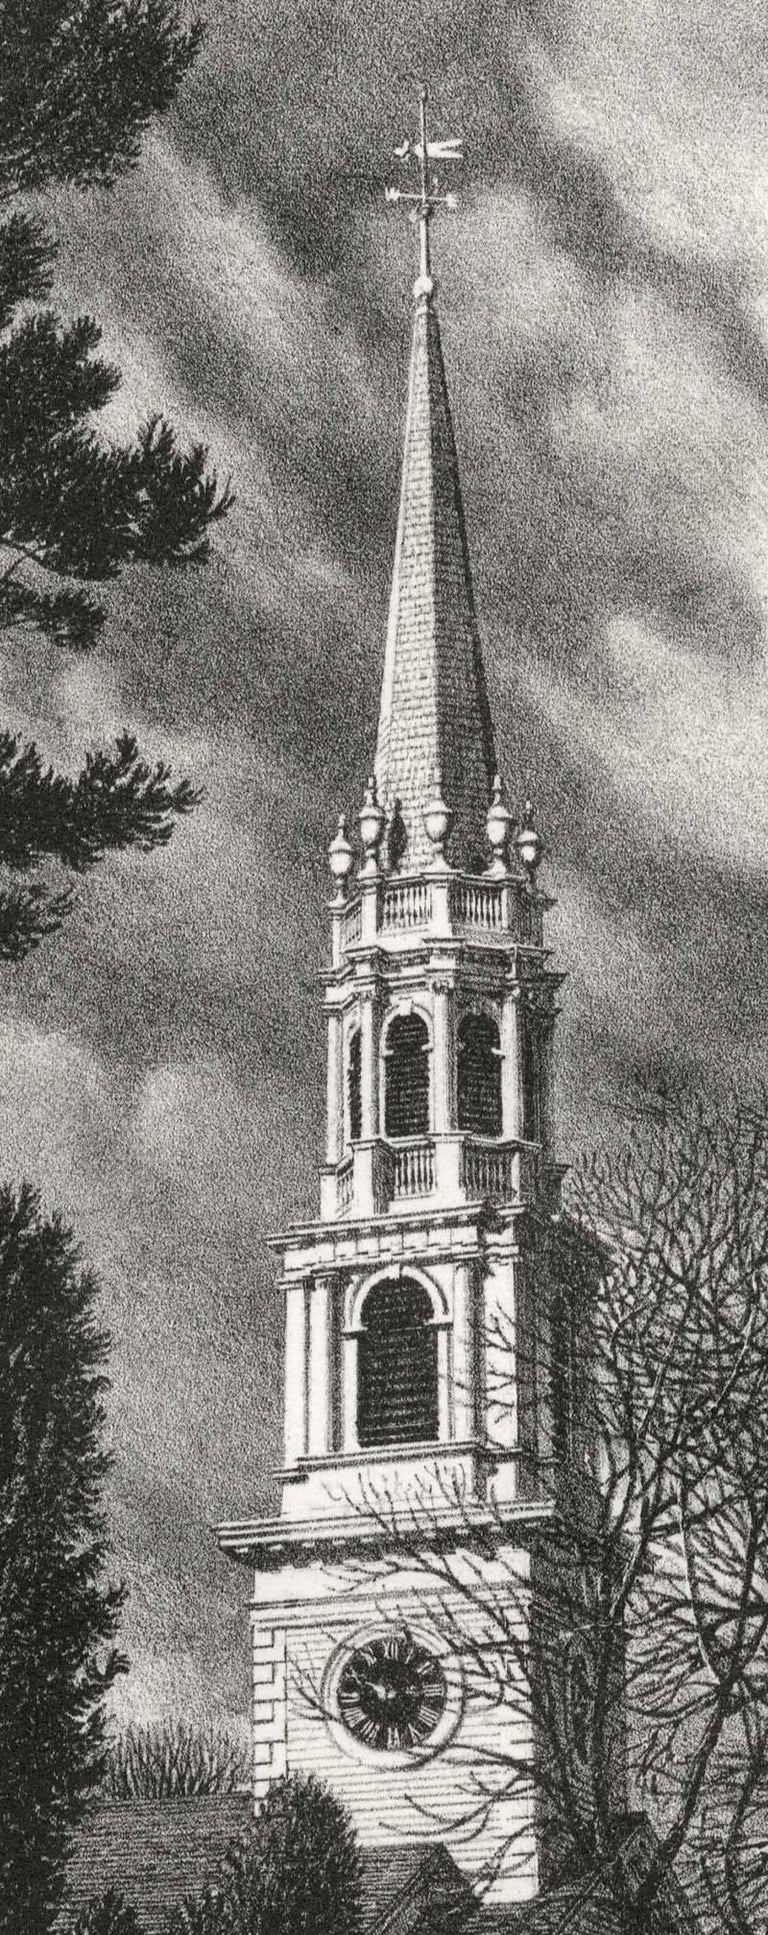 Congregational Church, Old Lyme, CT. (quintessential New England landmark) - Print by Walter DuBois Richards